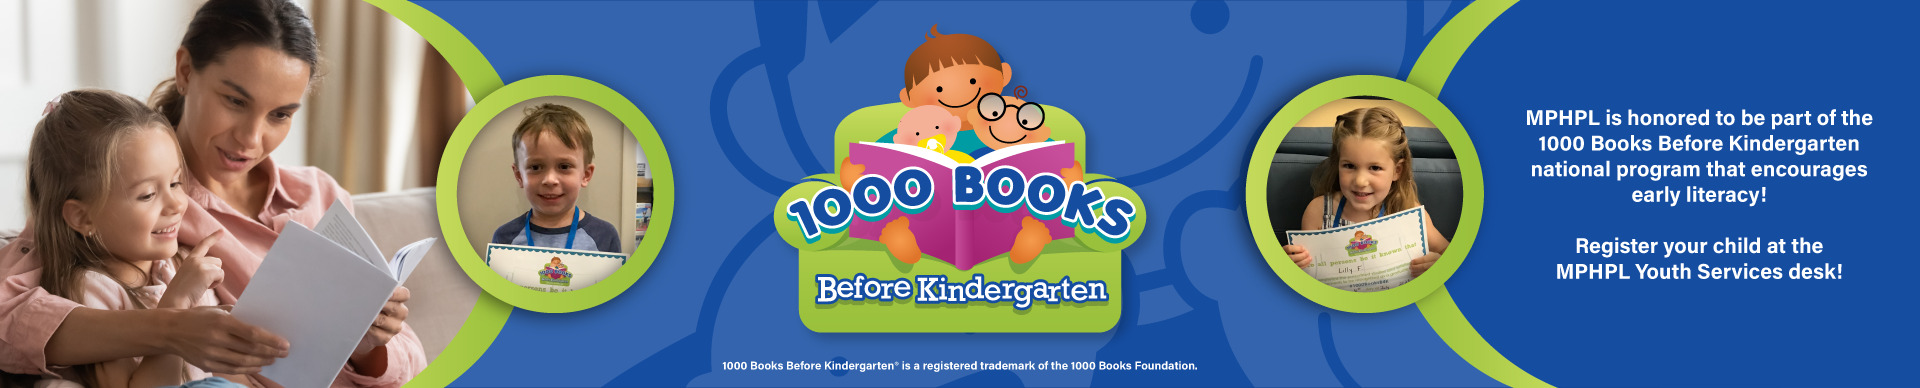 A woman and small child reading a book. Girl holding a 1000 Books competition certificate and a boy holding a 1000 Books competition certificate. Words on graphic, MPHPL is honored to be part of the 1000 Books Before Kindergarten national program that encourages early literacy! 1000 Books Before Kindergarten® is a registered trademark of the 1000 Books Foundation. Register your child at the MPHPL Youth Services desk!